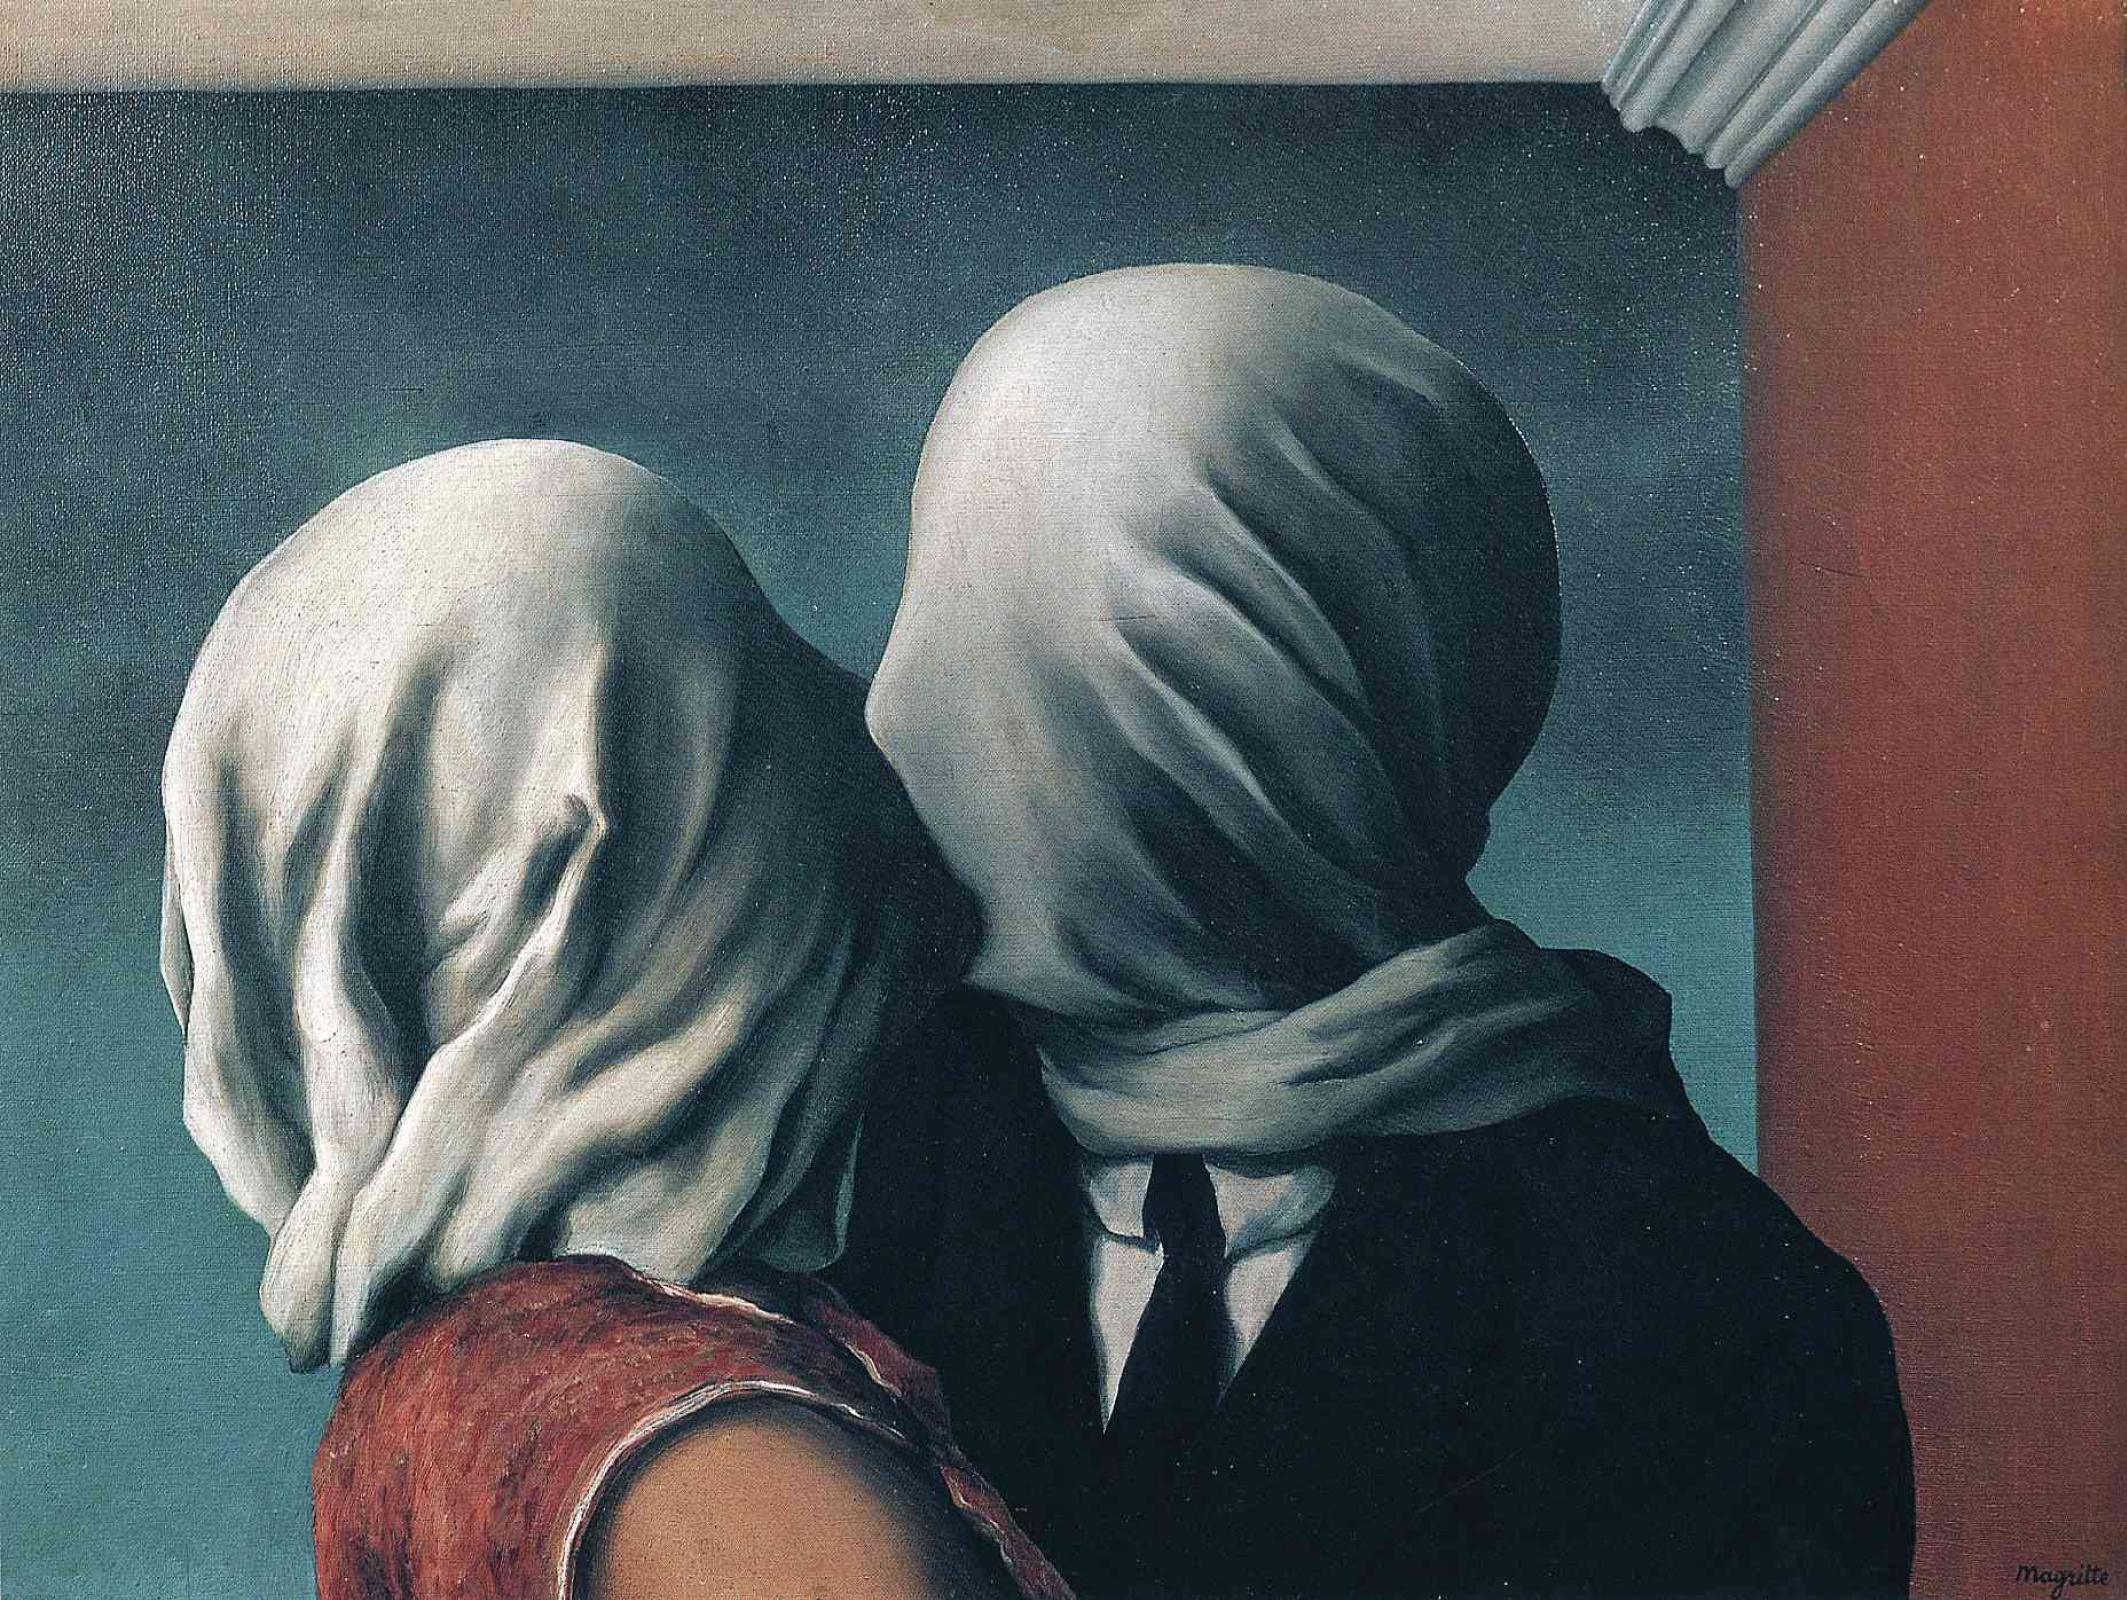 magritte paintings: magritte